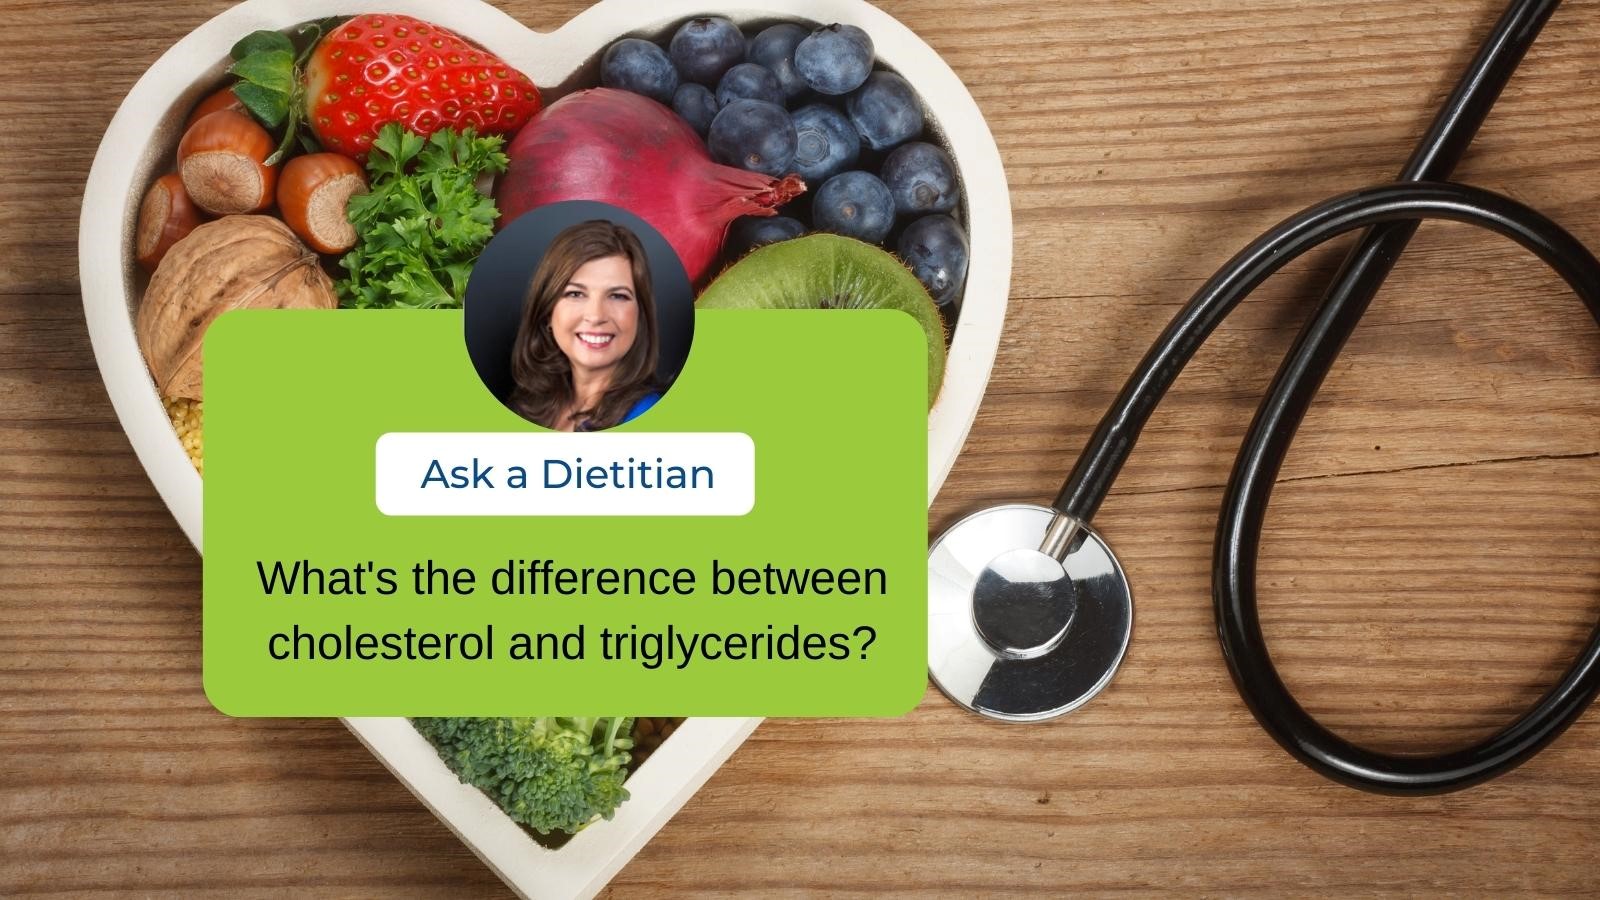 Ask the dietitian image of Lucia Weiler RD over a heart shaped bowl with berries and stethoscope